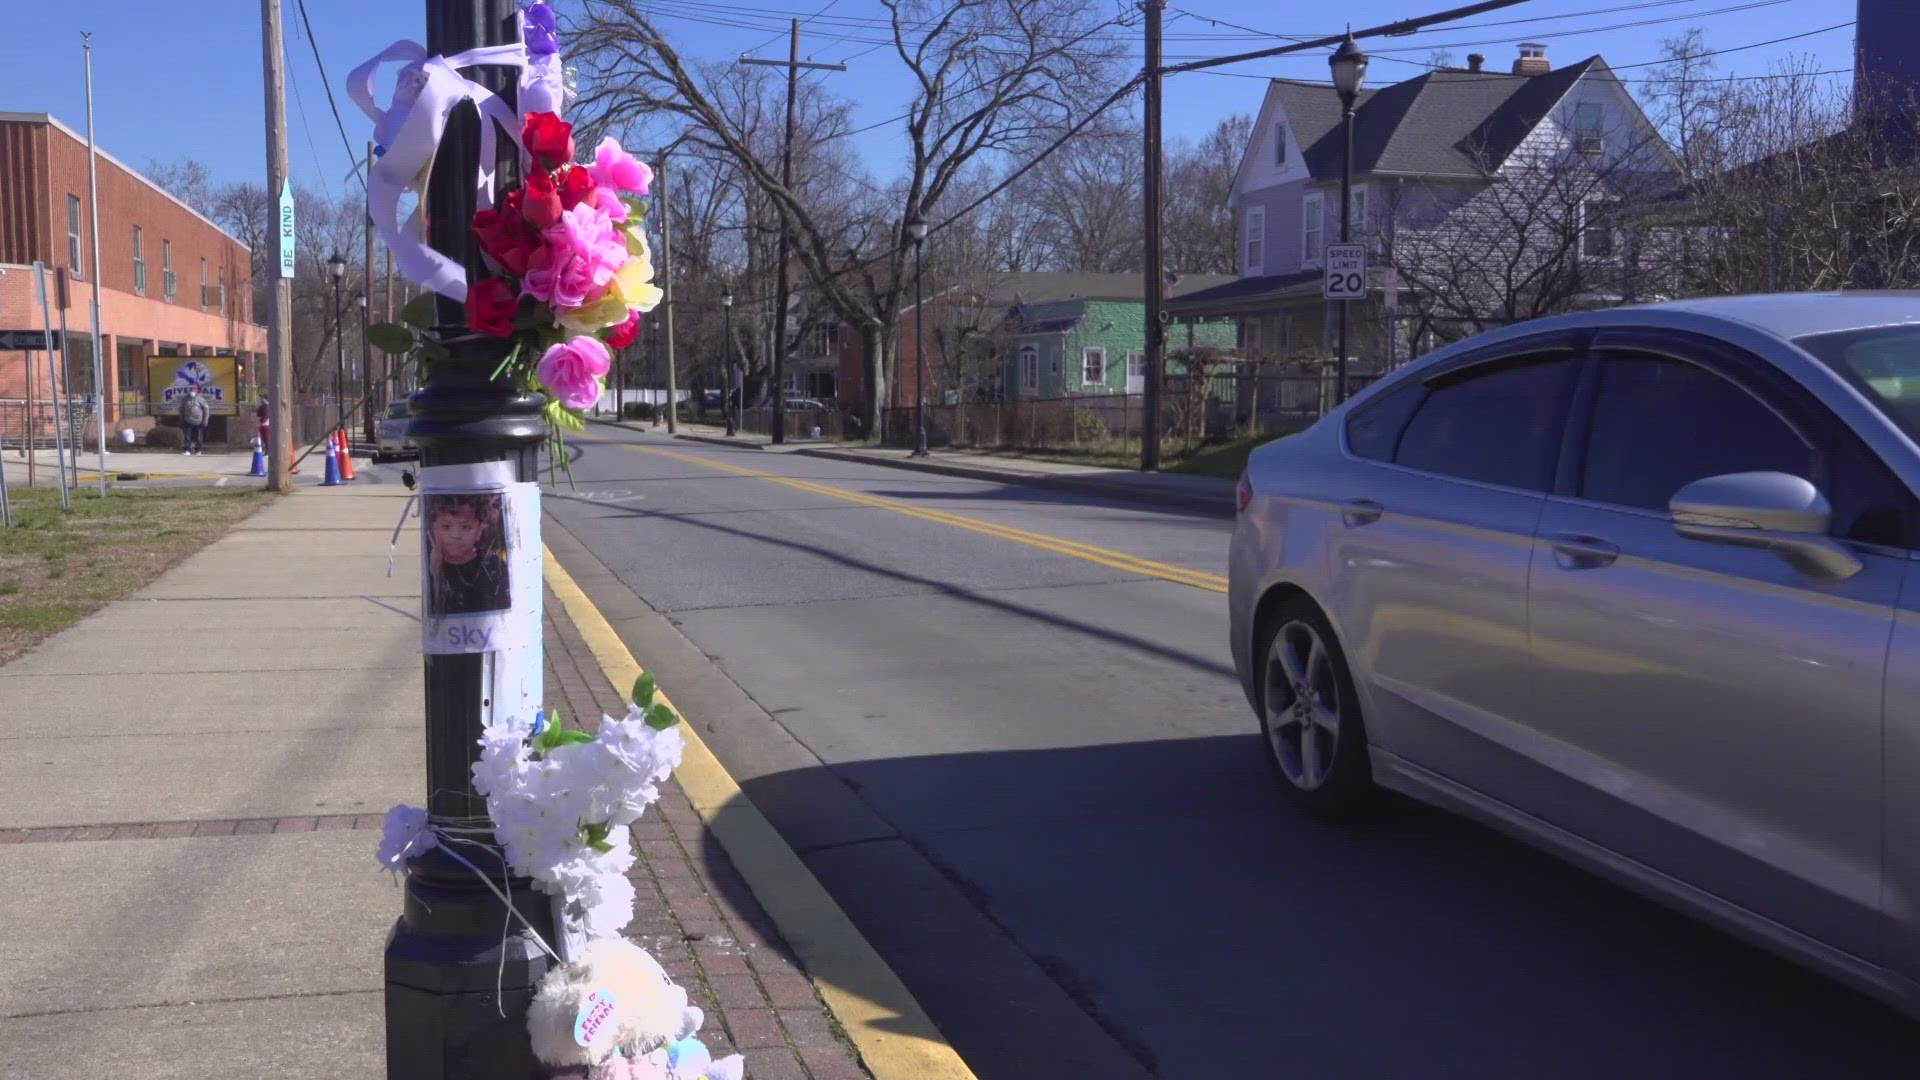 TWO KIDS WERE KILLED IN RIVERDALE PARK TRYING TO WALK TO SCHOOL. THE INCIDENT HIGHLIGHTED A PEDESTRIAN SAFETY CRISIS IN PRINCE GEORGE'S COUNTY.